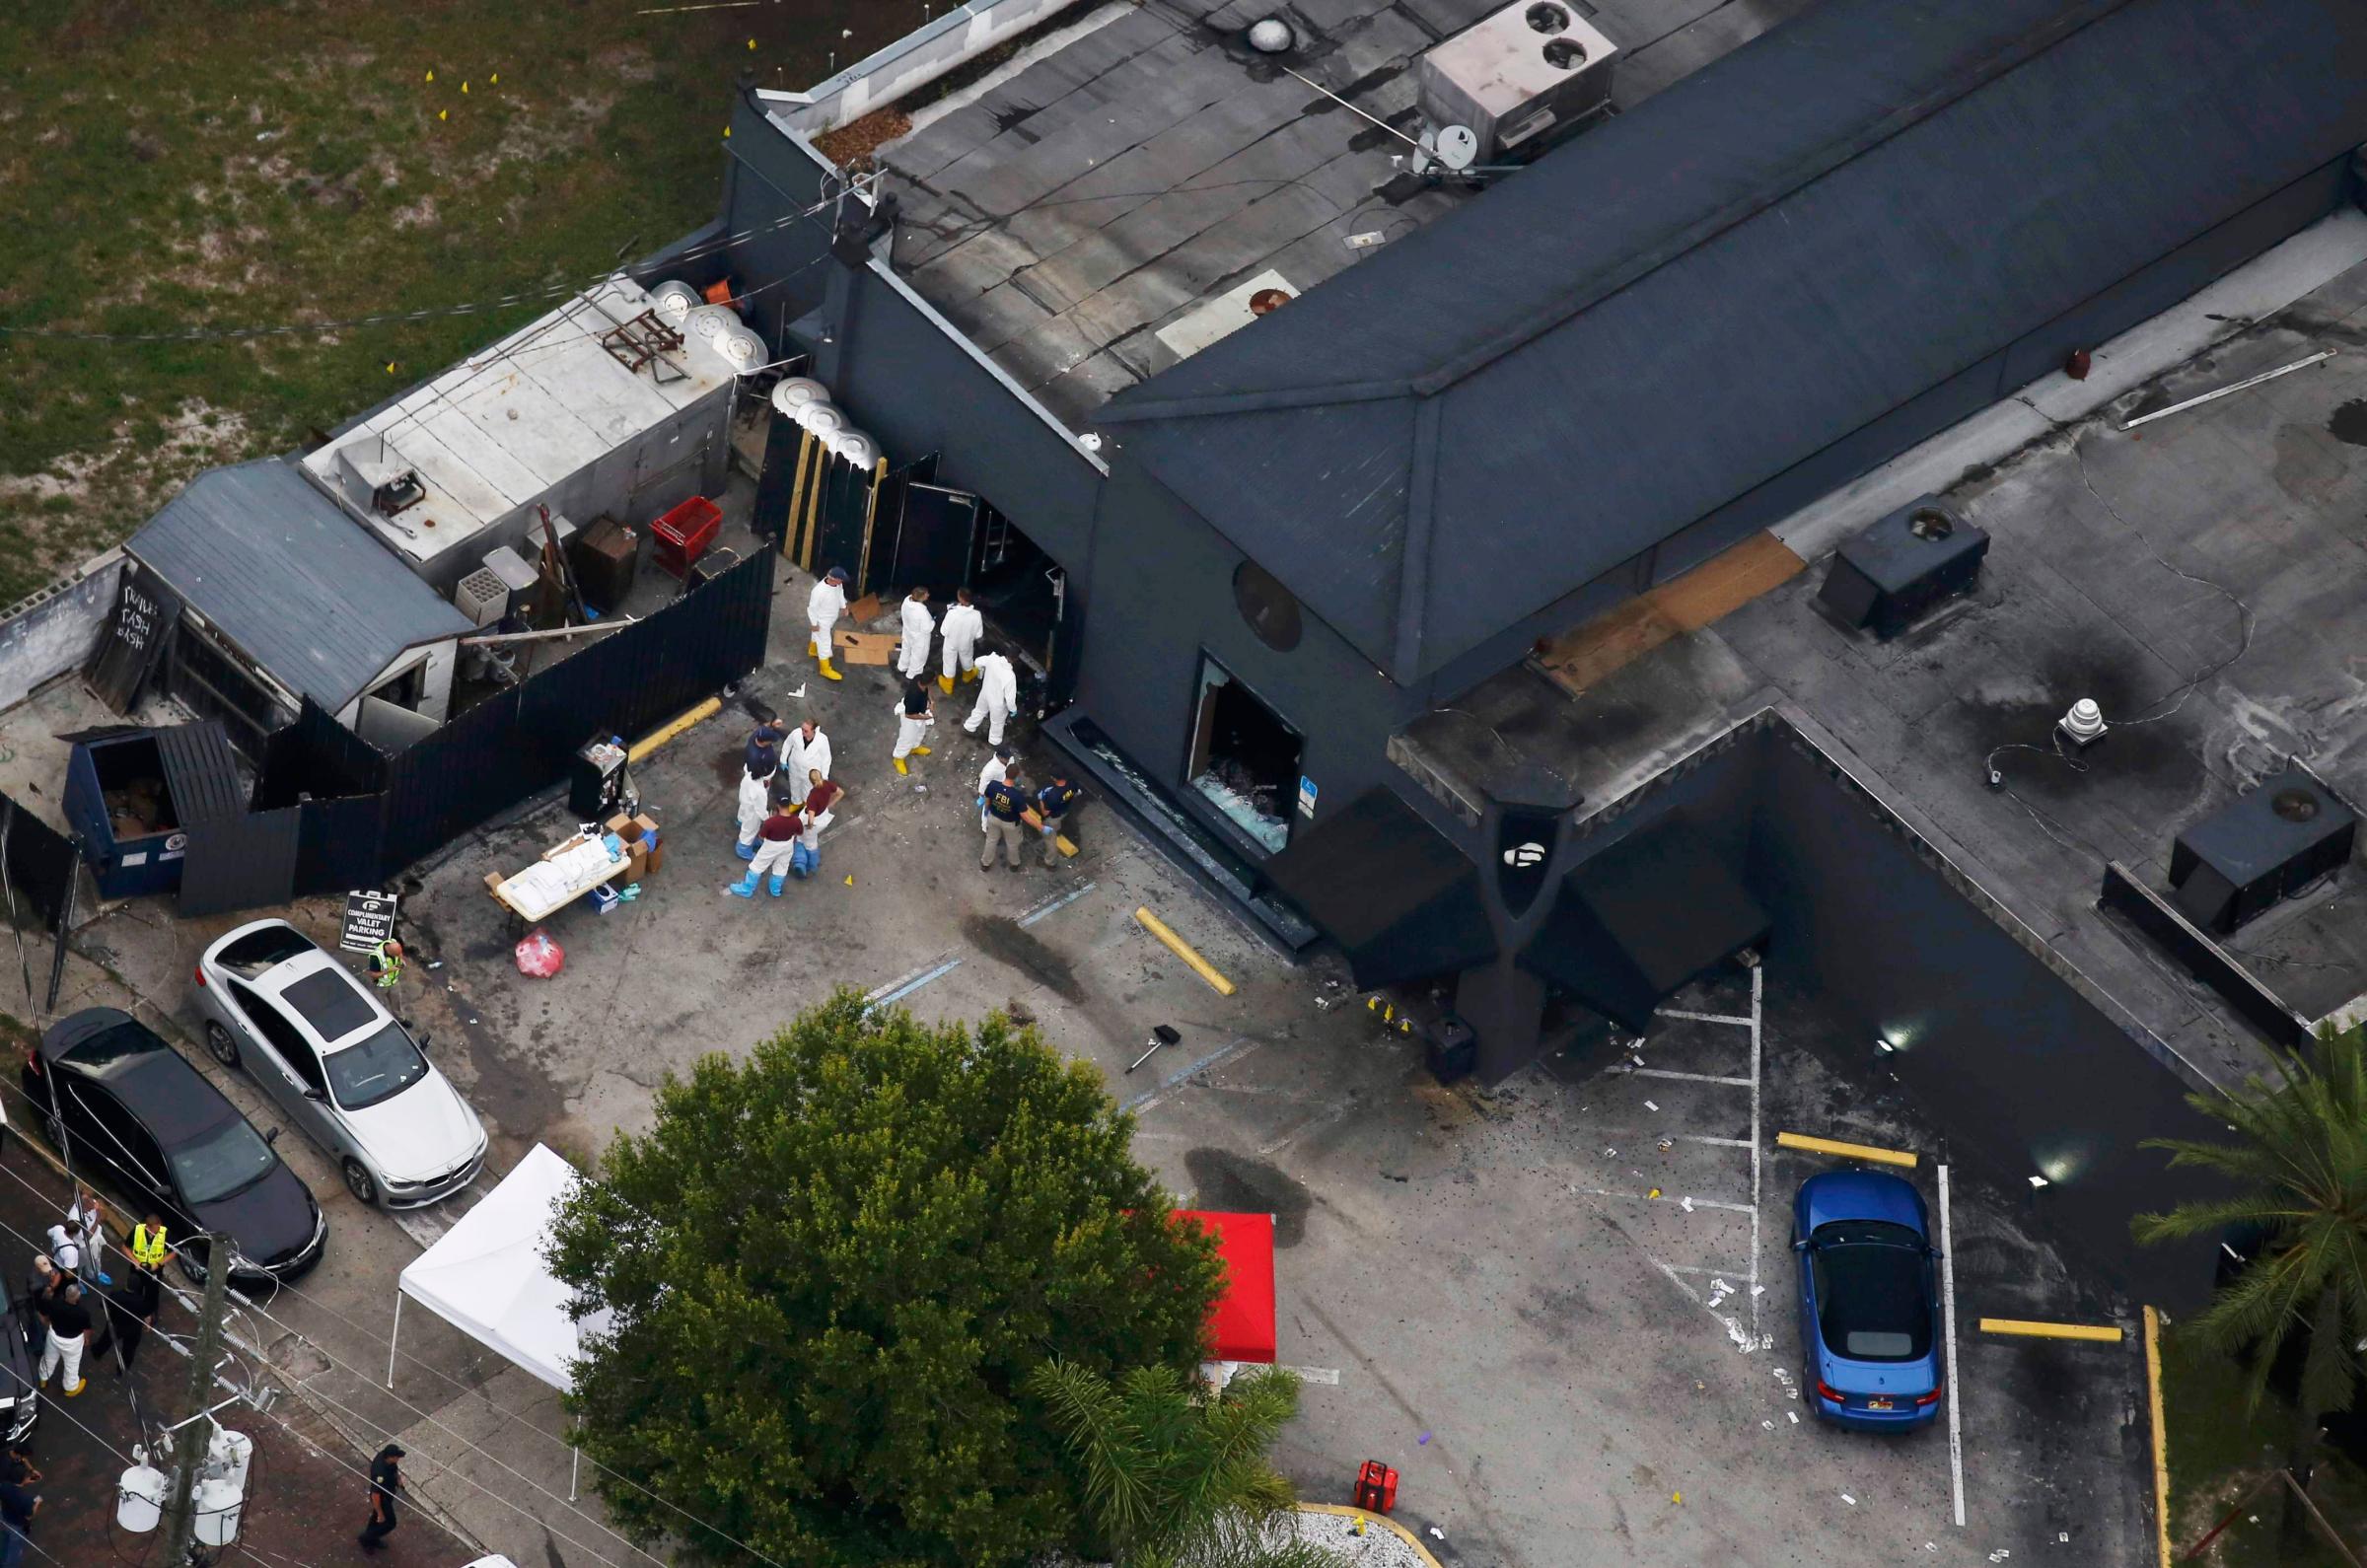 Police and forensics investigators work at the crime scene of the Pulse nightclub shooting in Orlando, Fla., on June 12, 2016.